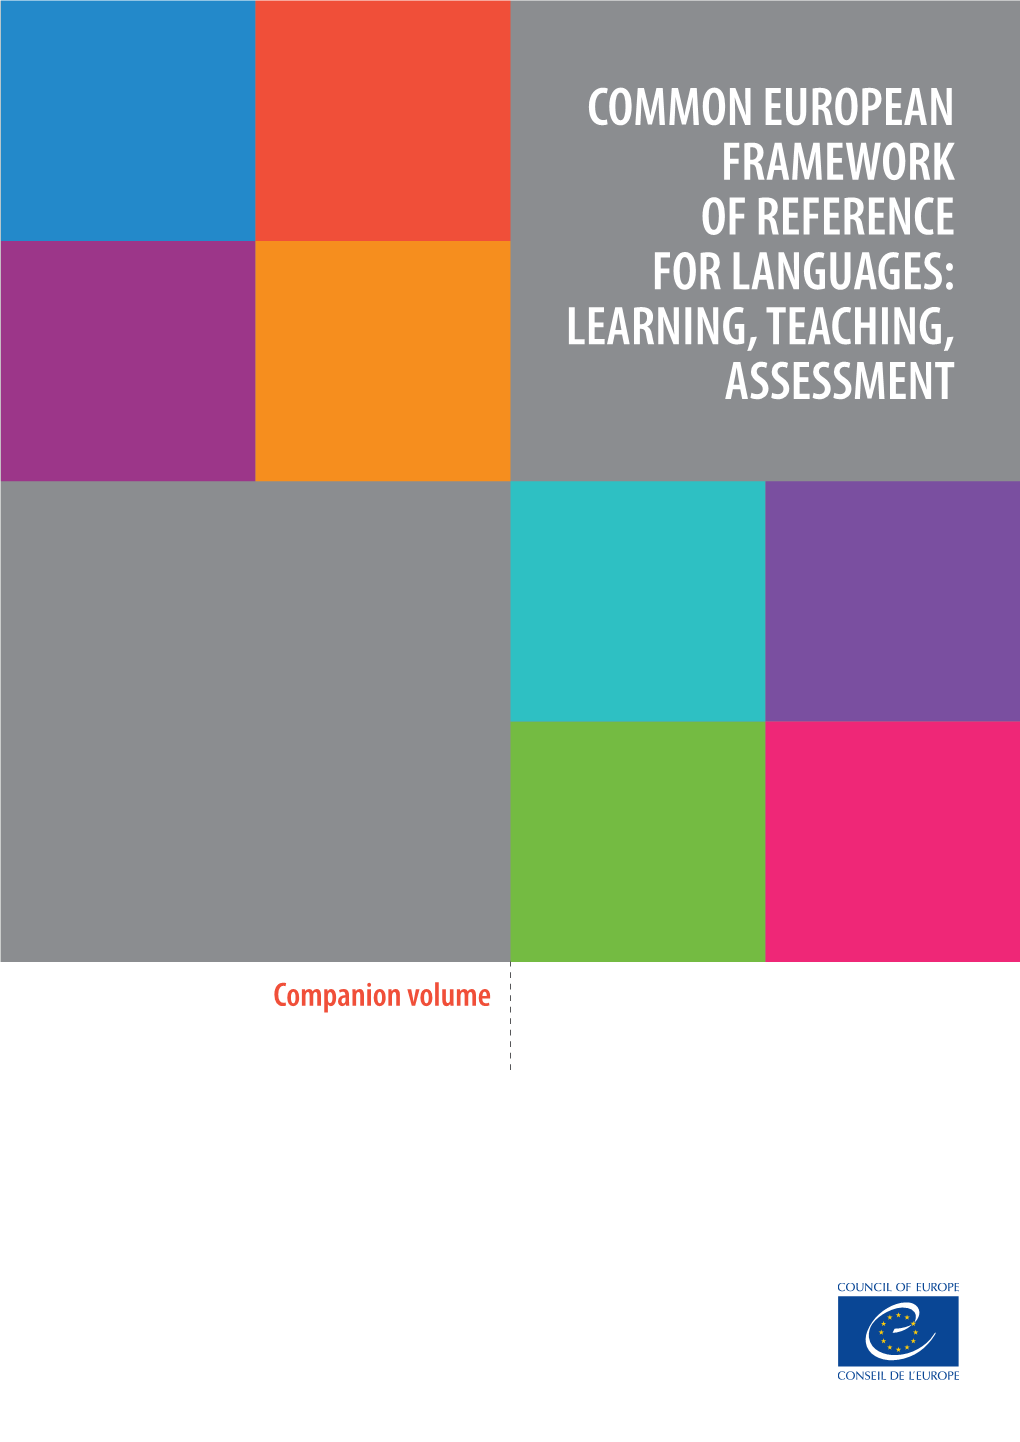 Common European Framework of Reference for Languages (CEFR) and Updates the 2001 FRAMEWORK Version